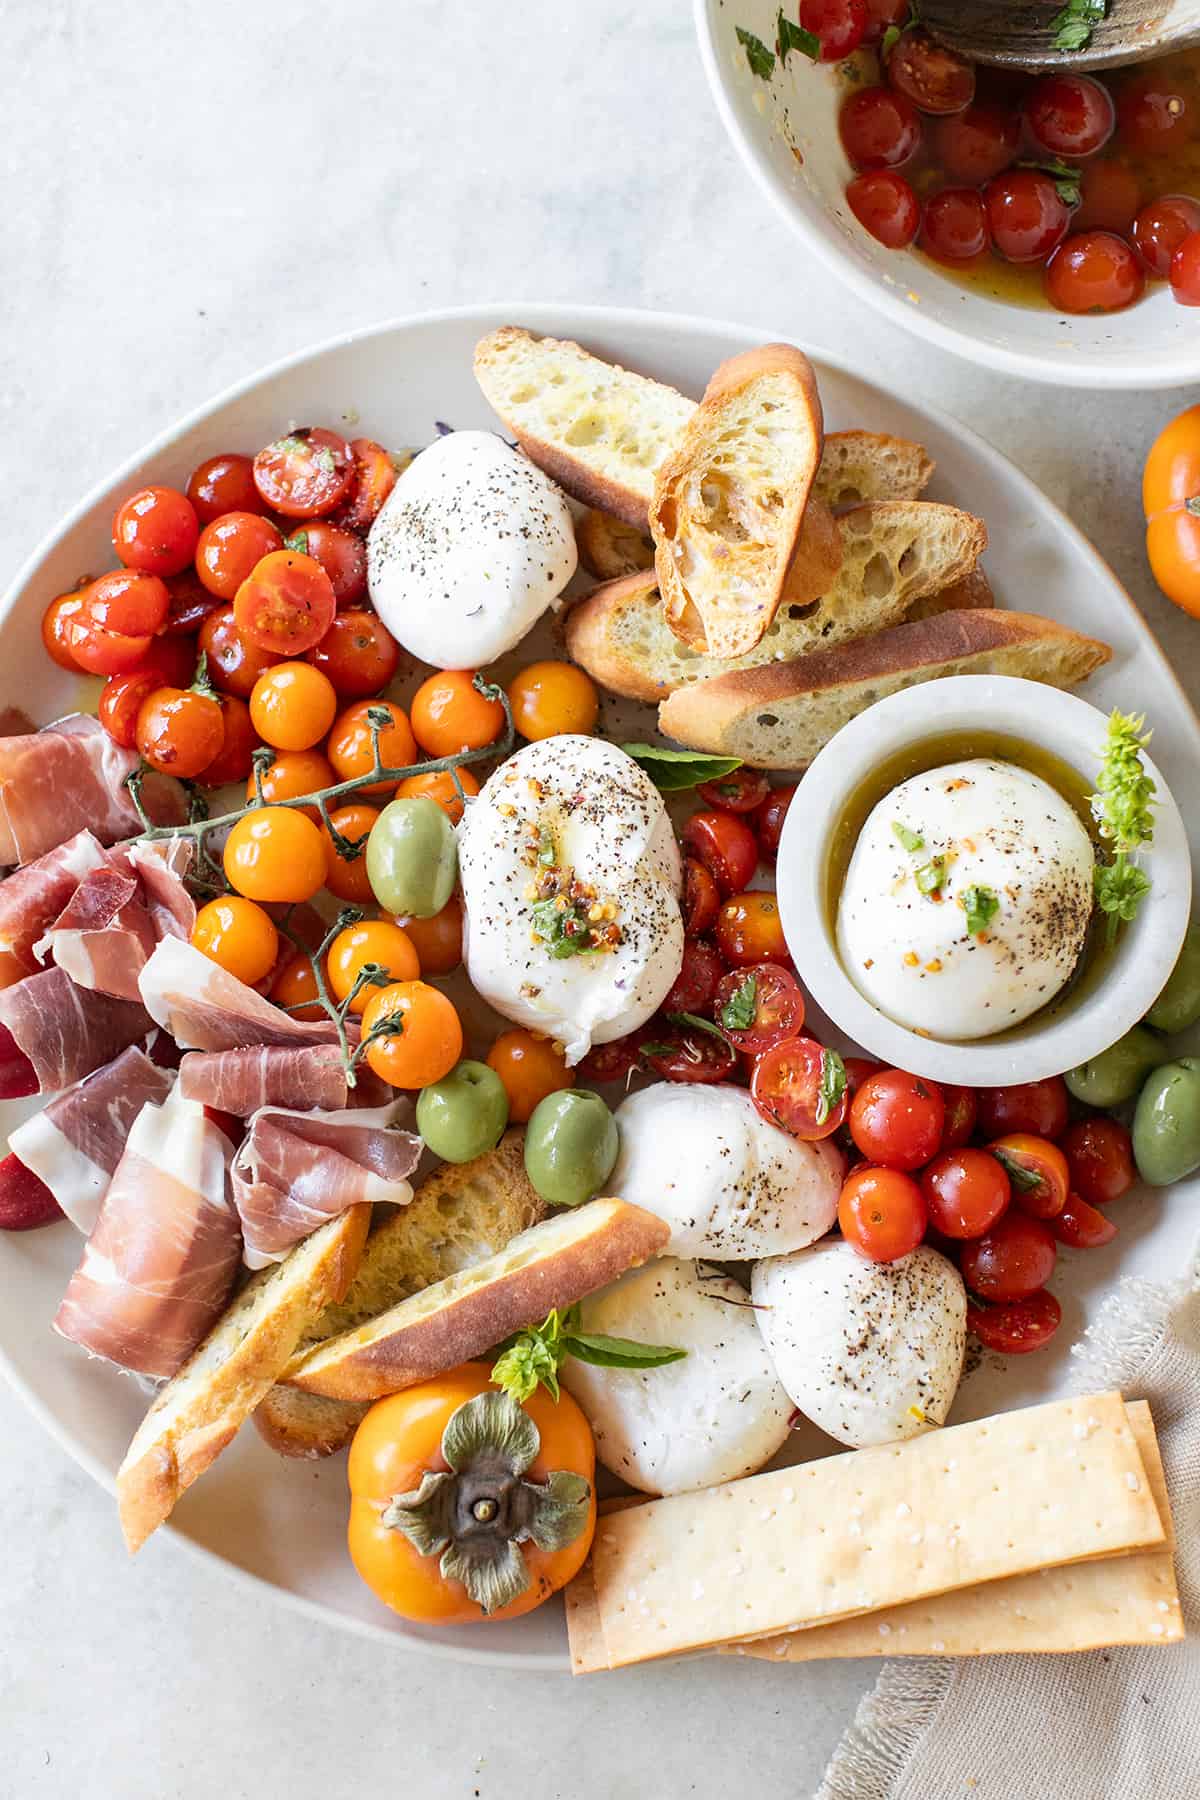 Burrata Platter with marinated tomatoes, crackers, olives and crostini.